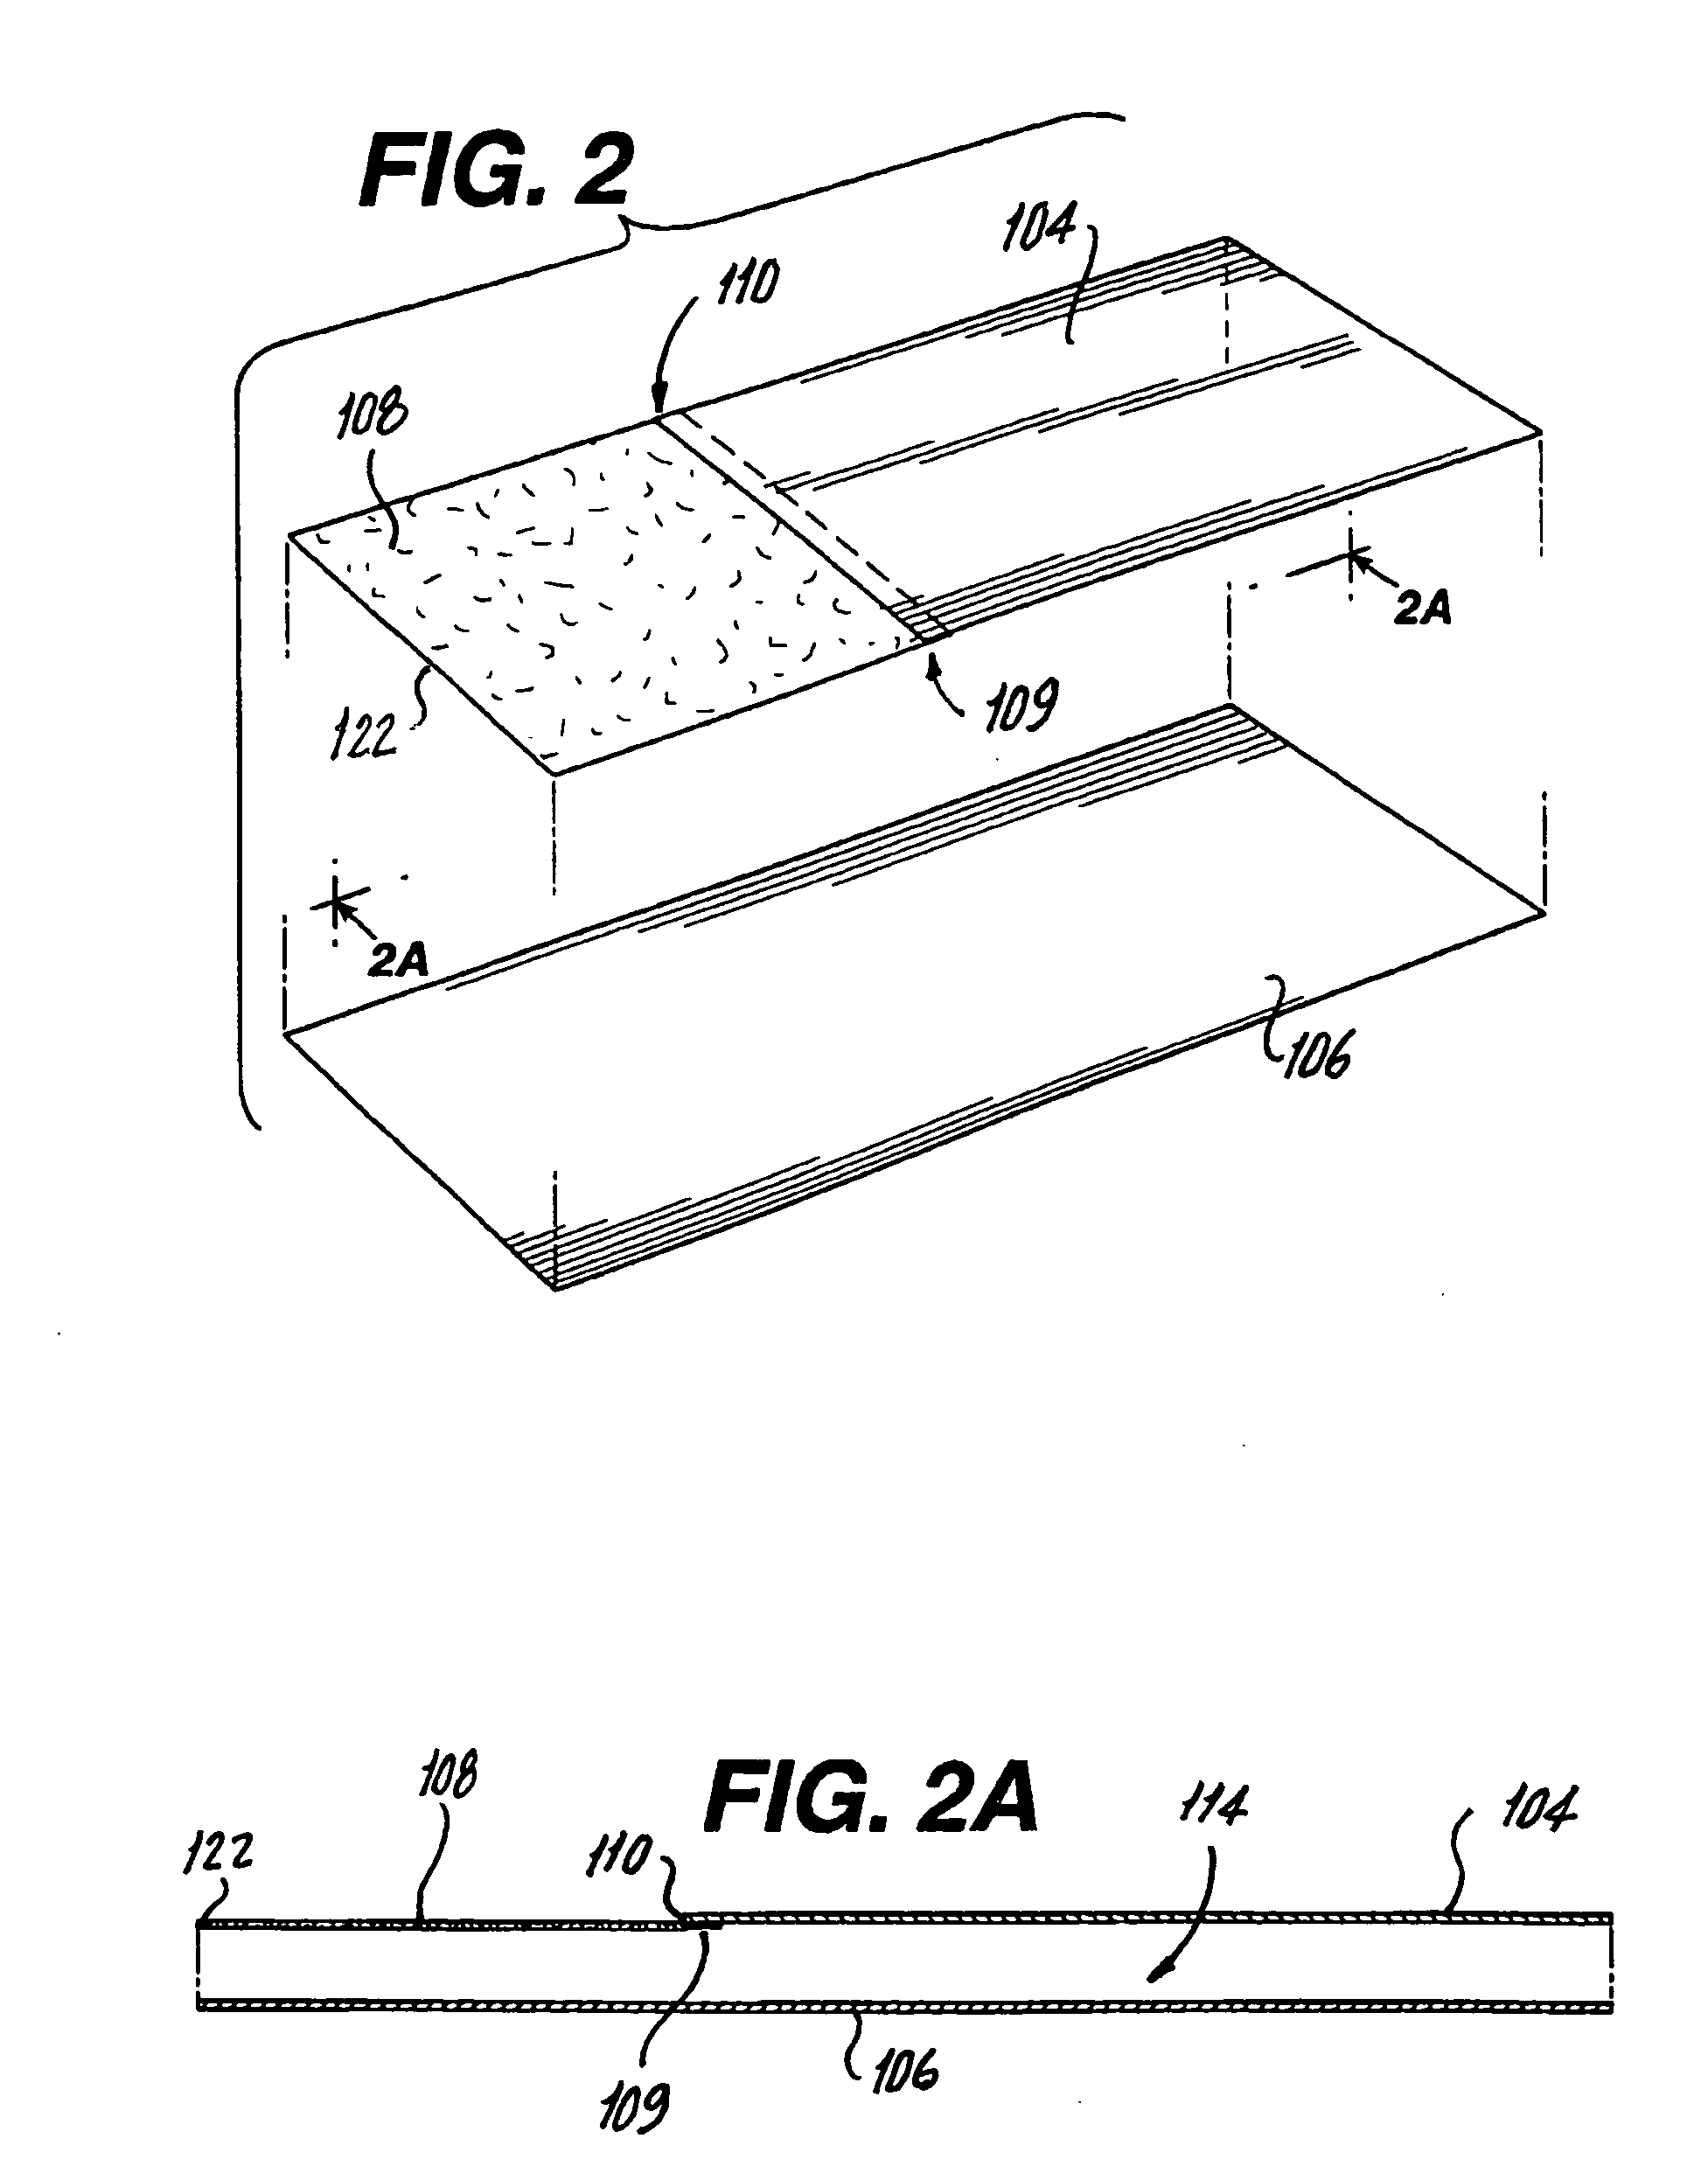 Method for improving stability and effectivity of a drug-device combination product